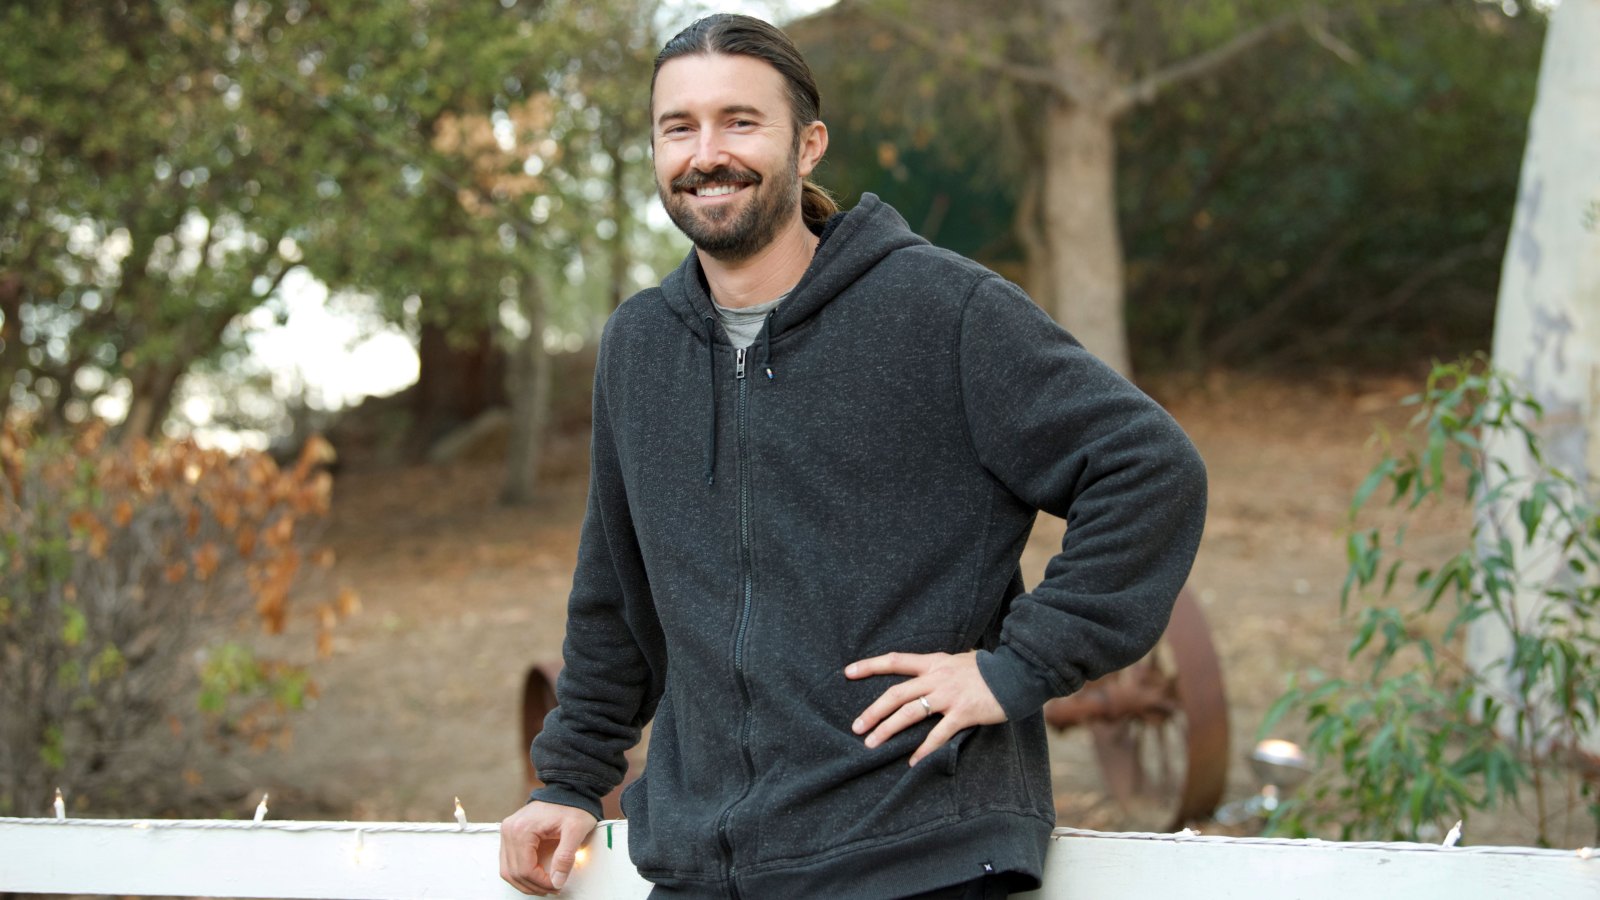 Brandon Jenner Is Dating Cayley Stoker Six Months After Split from Estranged Wife Leah